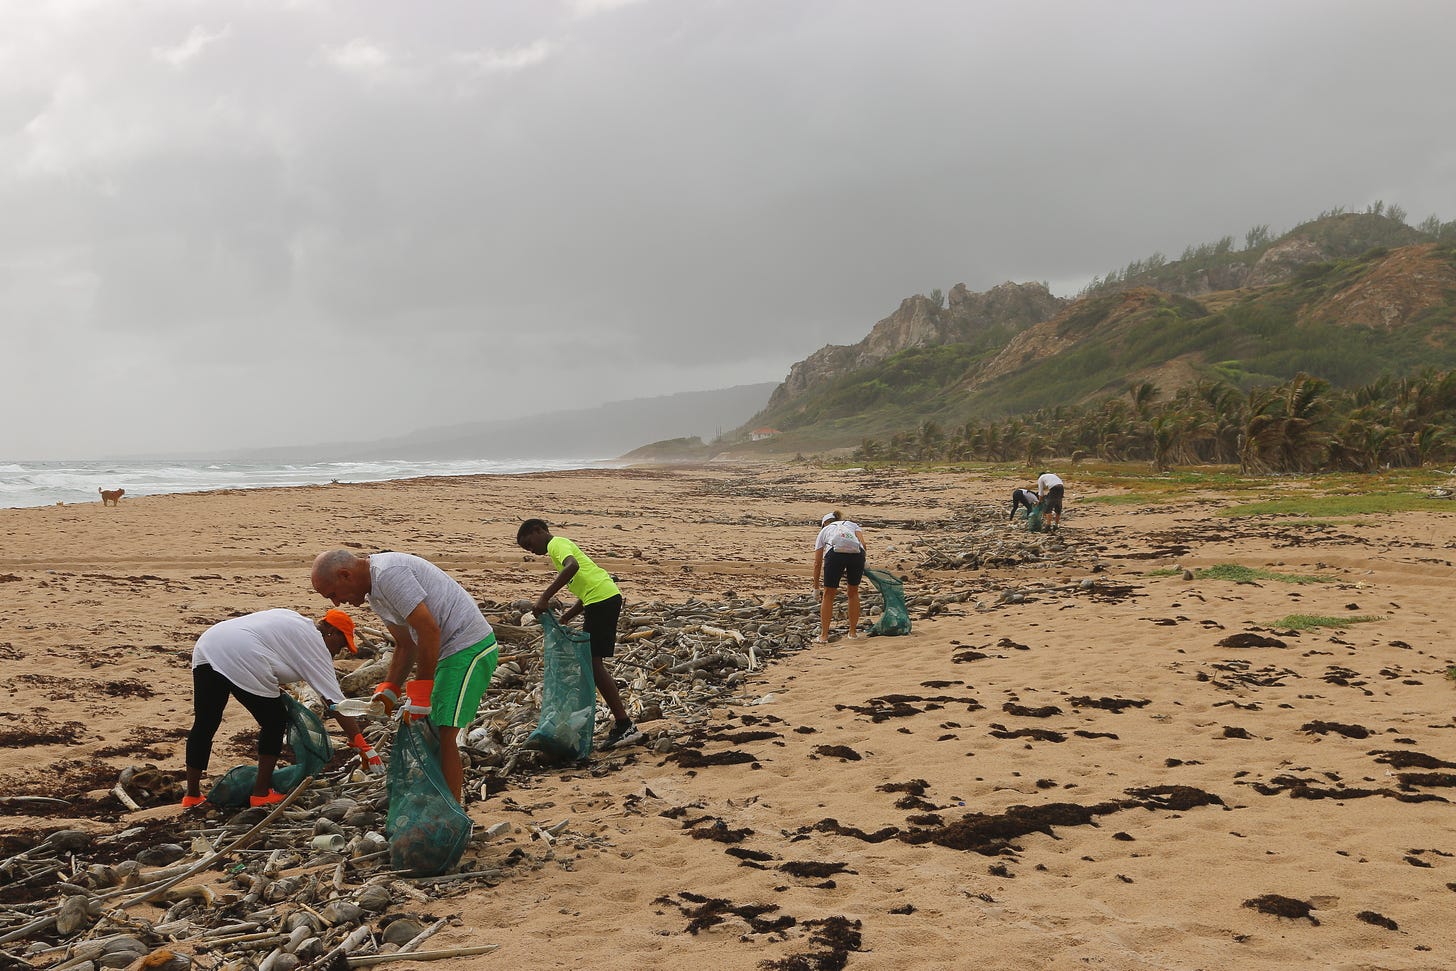 A beach cleanup in Barbados.